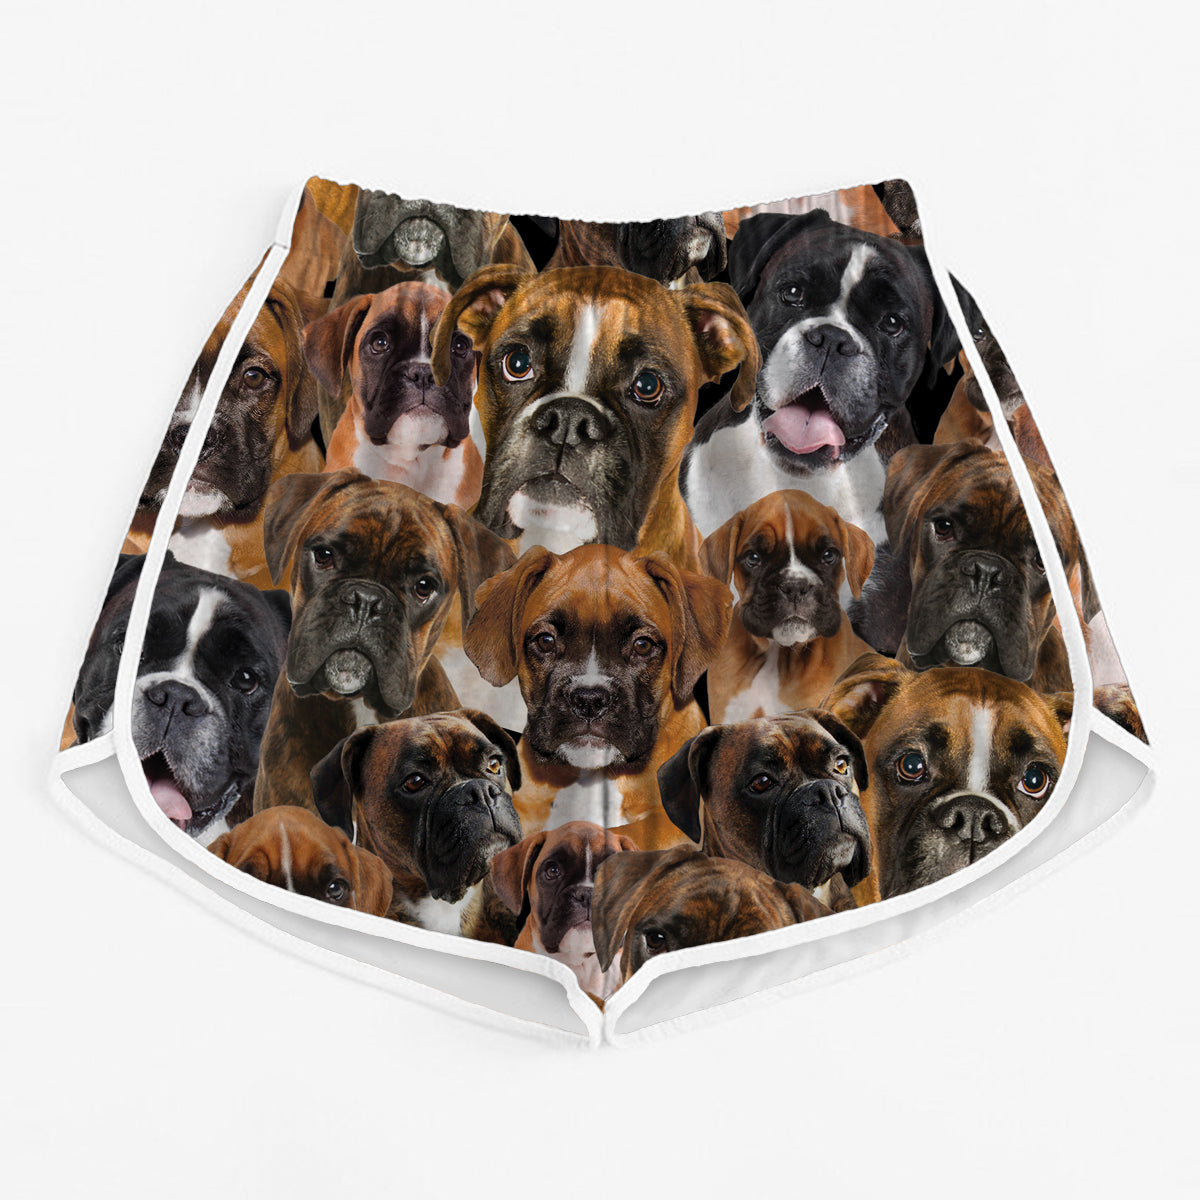 You Will Have A Bunch Of Boxers - Women's Running Shorts V1